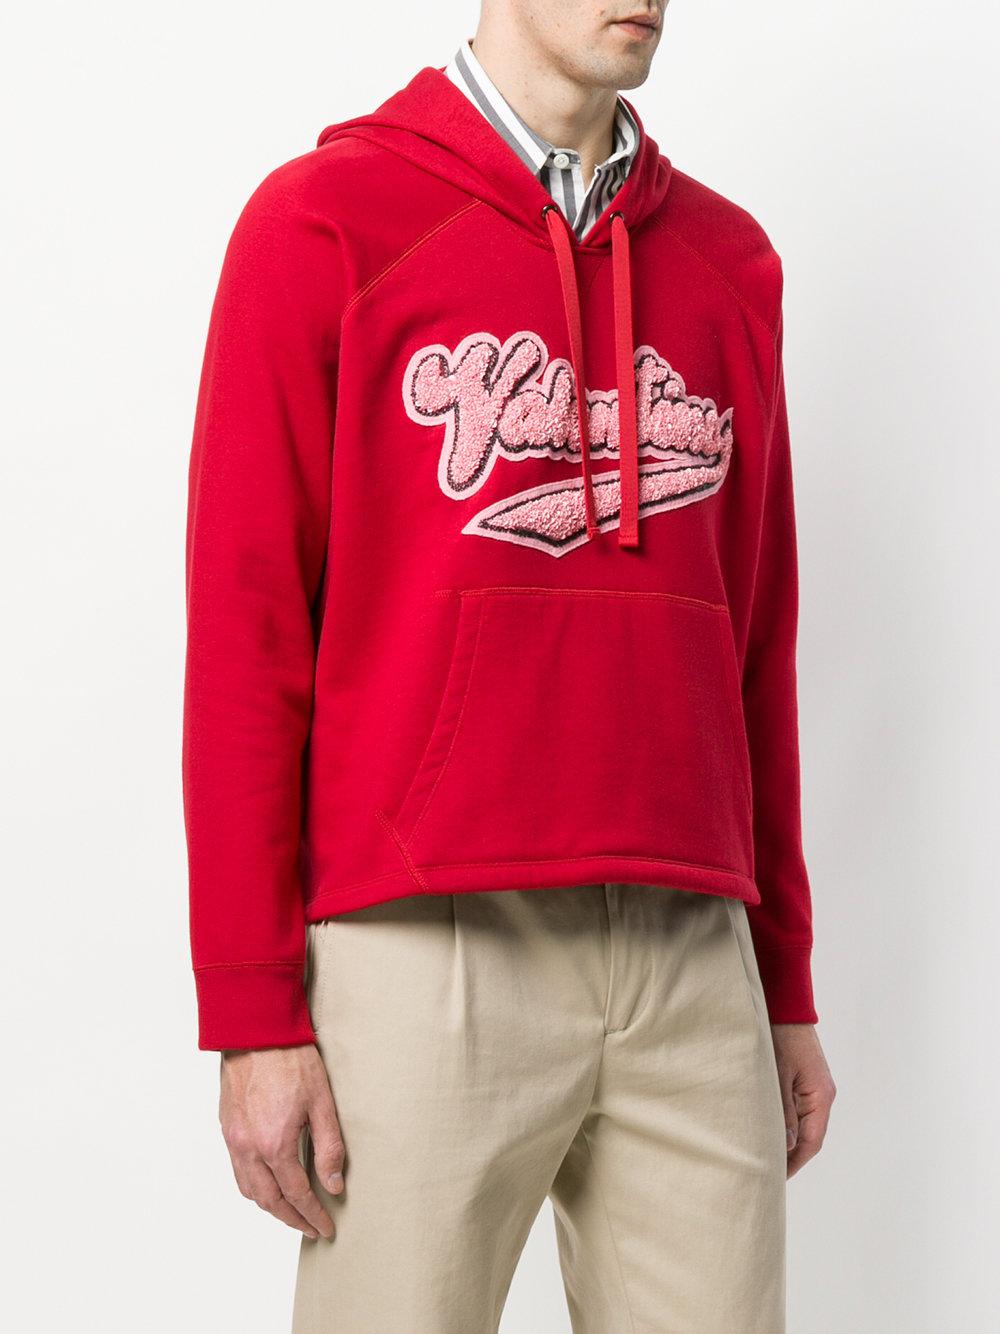 Valentino Cotton Cropped Hoodie in Red for Men - Lyst